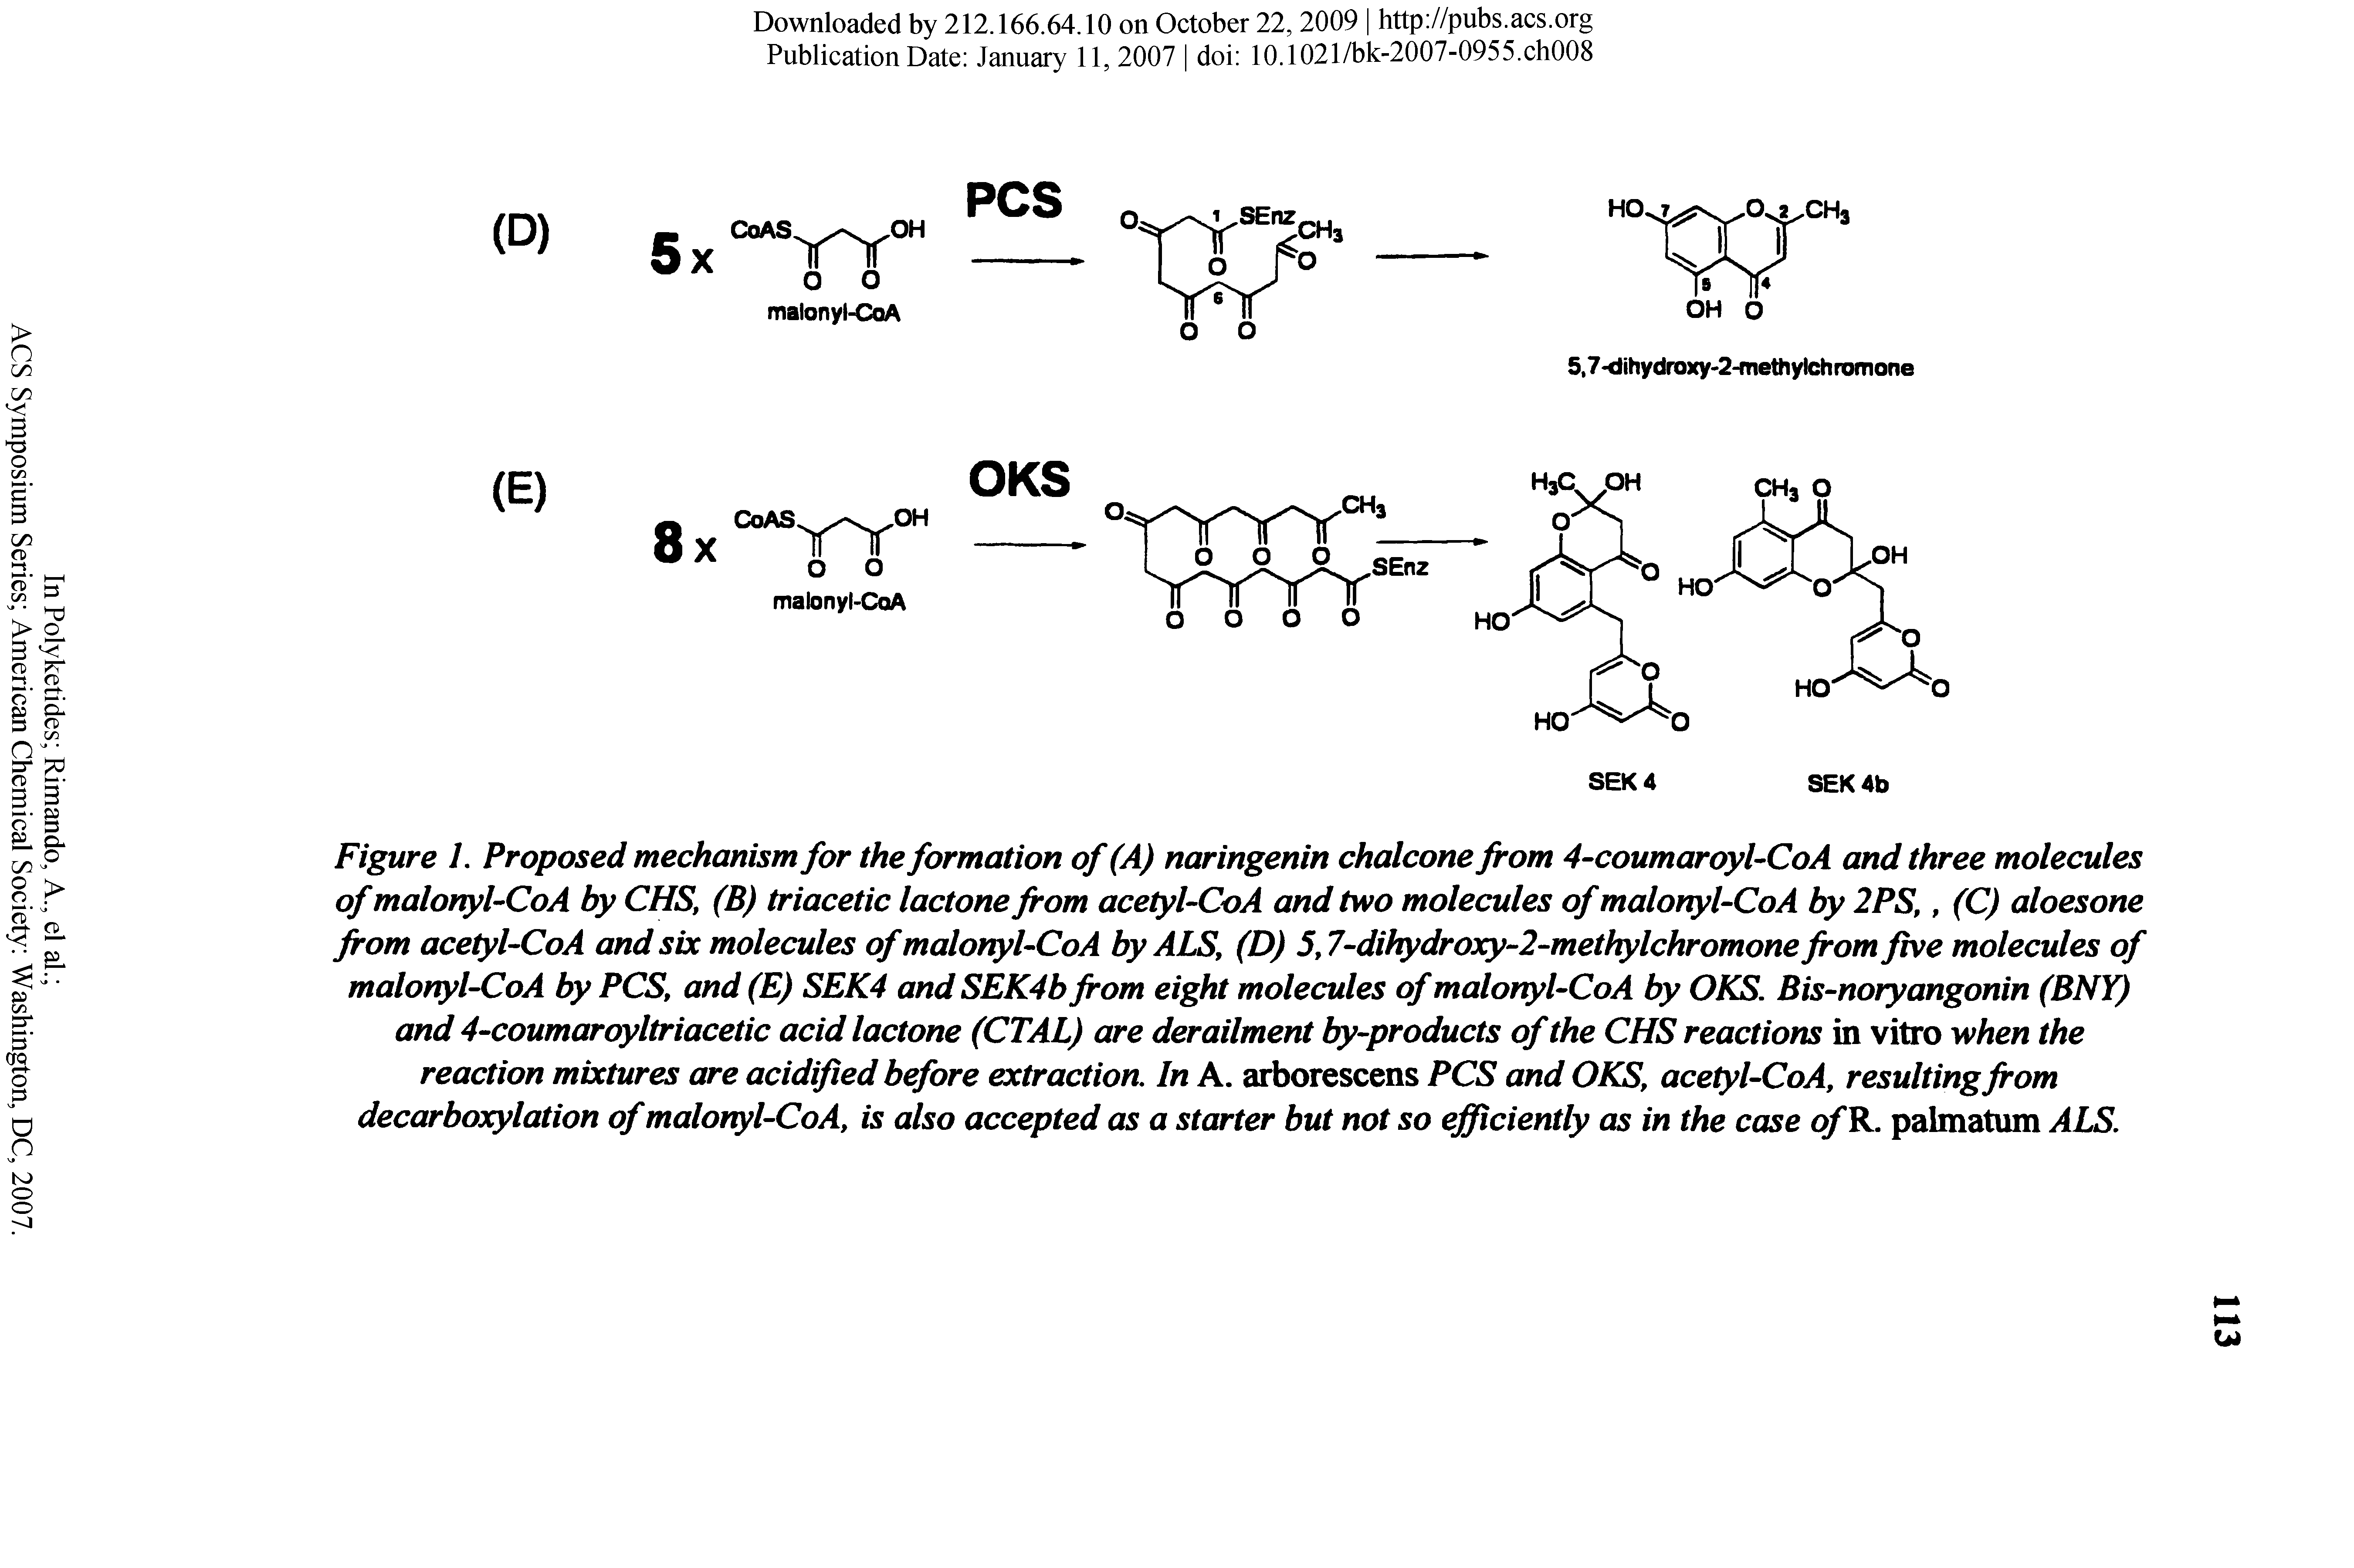 Figure 1. Proposed mechanism for the formation of (A) naringenin chalcone from 4-coumaroyl-CoA and three molecules of malonyUCoA by CHS, (B) triacetic lactone from acetyl-CoA and two molecules of malortyUCoA by 2PS, (C) aloesone from acetyl-CoA and six molecules of malonyUCoA by ALS, (D) 5,7-dihydroxy-2-methylchromone from five molecules of malonyl-CoA by PCS, and (E) SEK4 and SEK4b from eight molecules of malonyl-CoA by OKS. Bis-noryangonin (BNY) and 4-coumaroyltriacetic acid lactone (CTAL) are derailment by-products of the CHS reactions in vitro when the reaction mixtures are acidified before extraction. In A. arborescens PCS and OKS, acetyl-CoA, resulting from decarboxylation of malonyl-CoA, is also accepted as a starter but not so efficiently as in the case ofR. palmatum ALS.